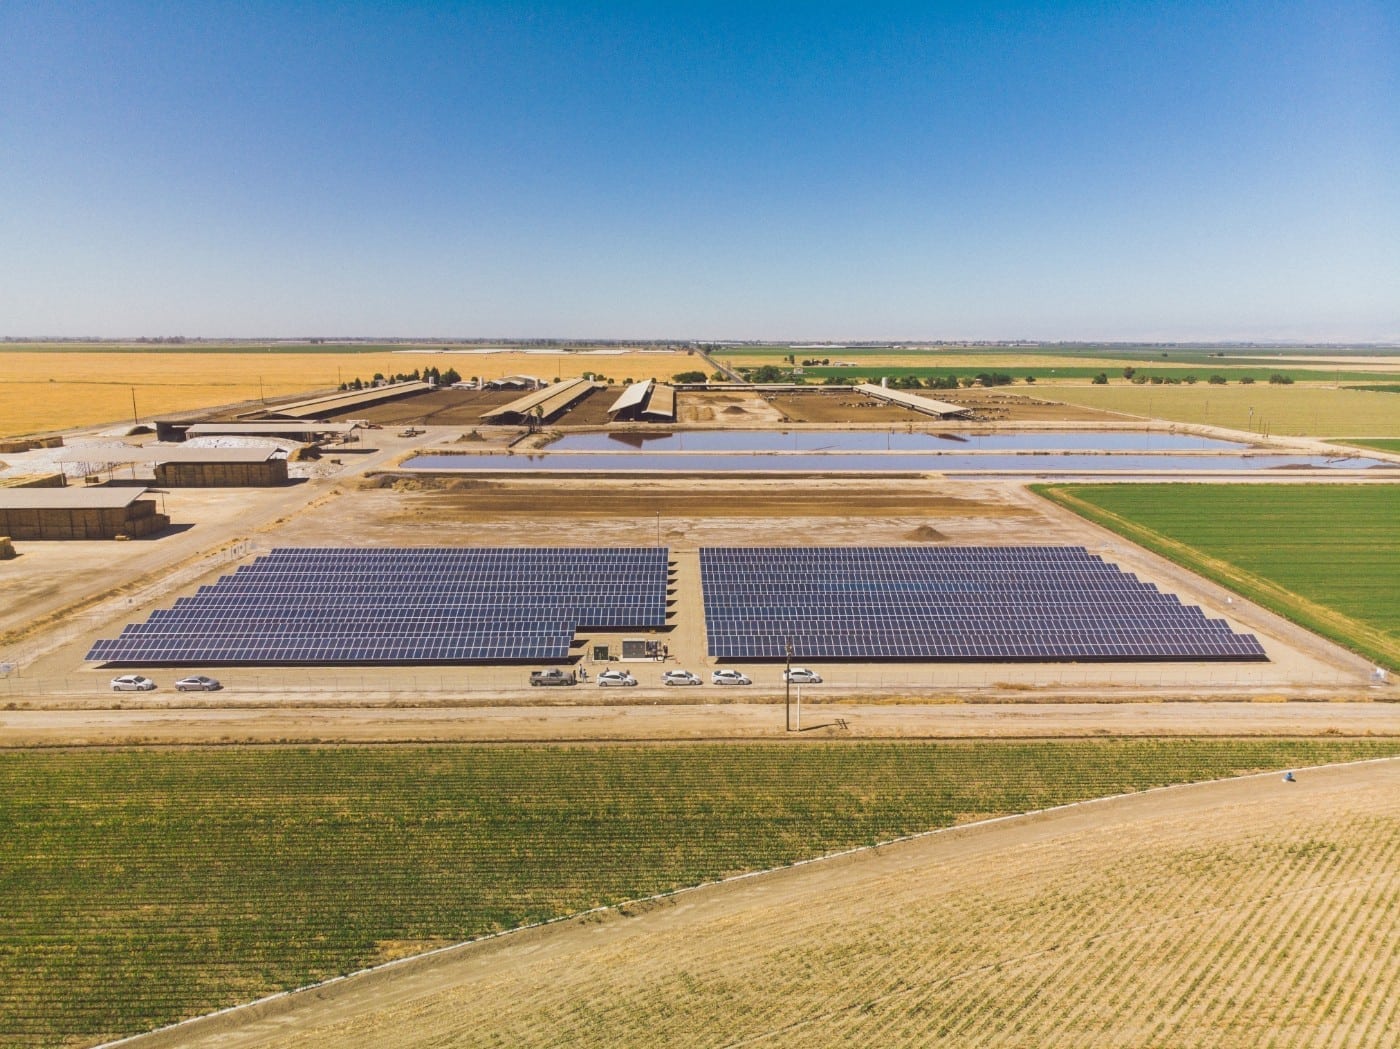 Aerial view of the solar installation at Rockshar Dairy in California surrounded by crop land, livestock pens and two water retention ponds.